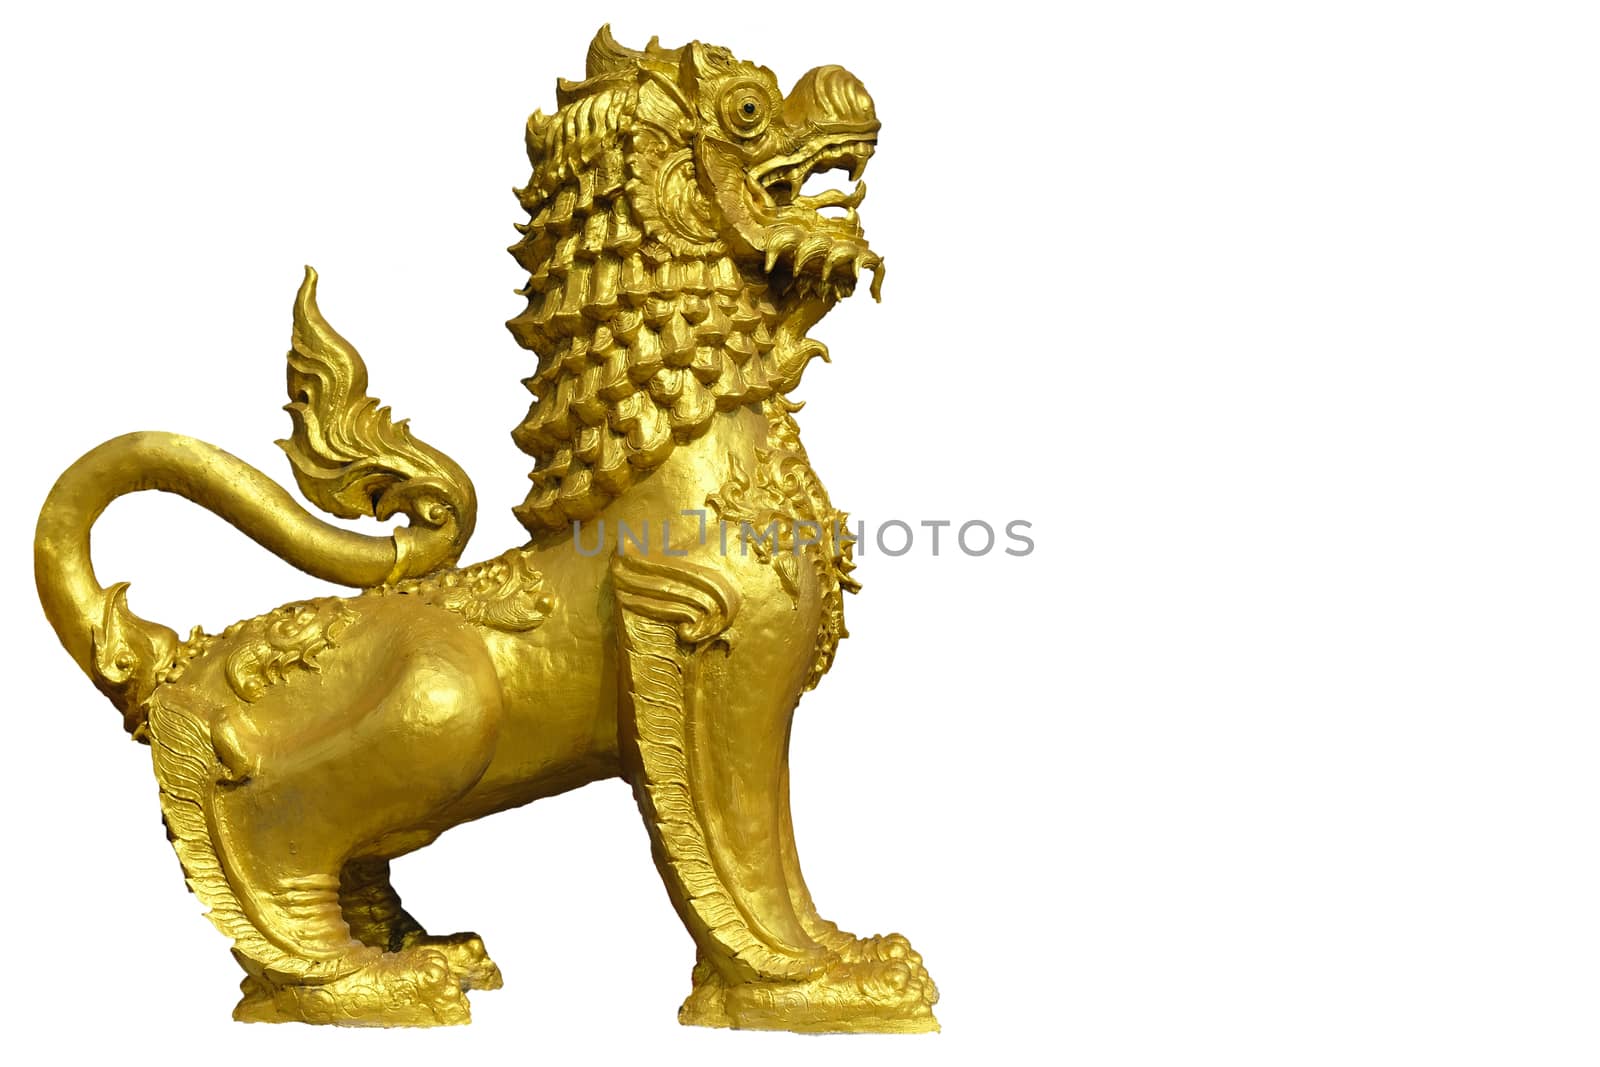 A lion temple protector. This sculpture made of bricks and lime and painted in white or gold is generally seen in front of the temple throughout the north of Thailand, isolated on white background